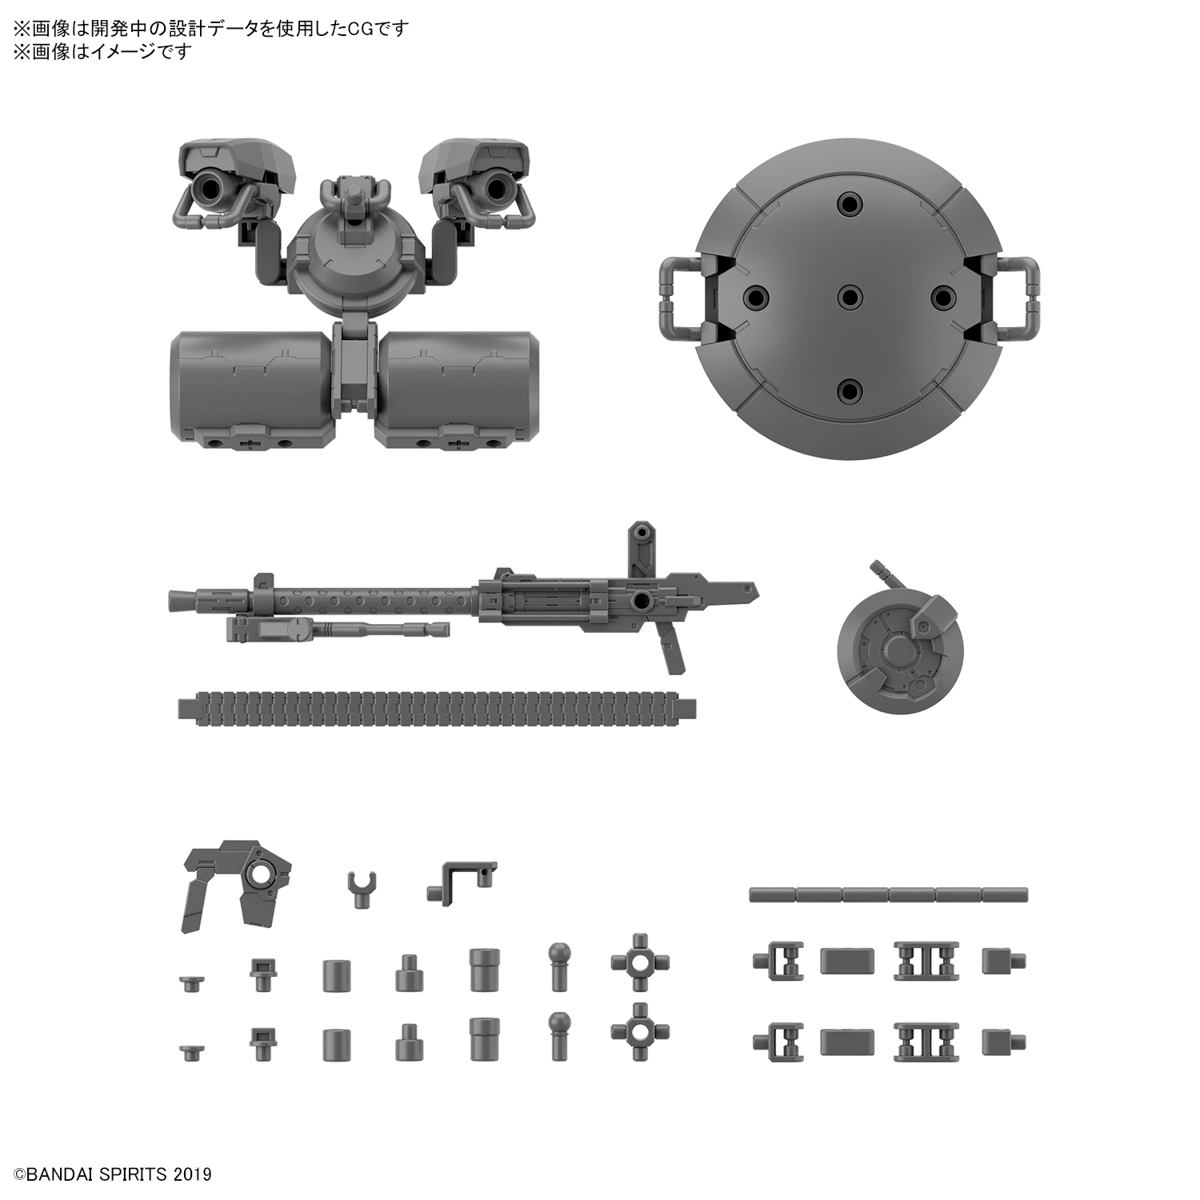 1/144 30MM Customized Weapons (Heavy Weapons 2) - 02